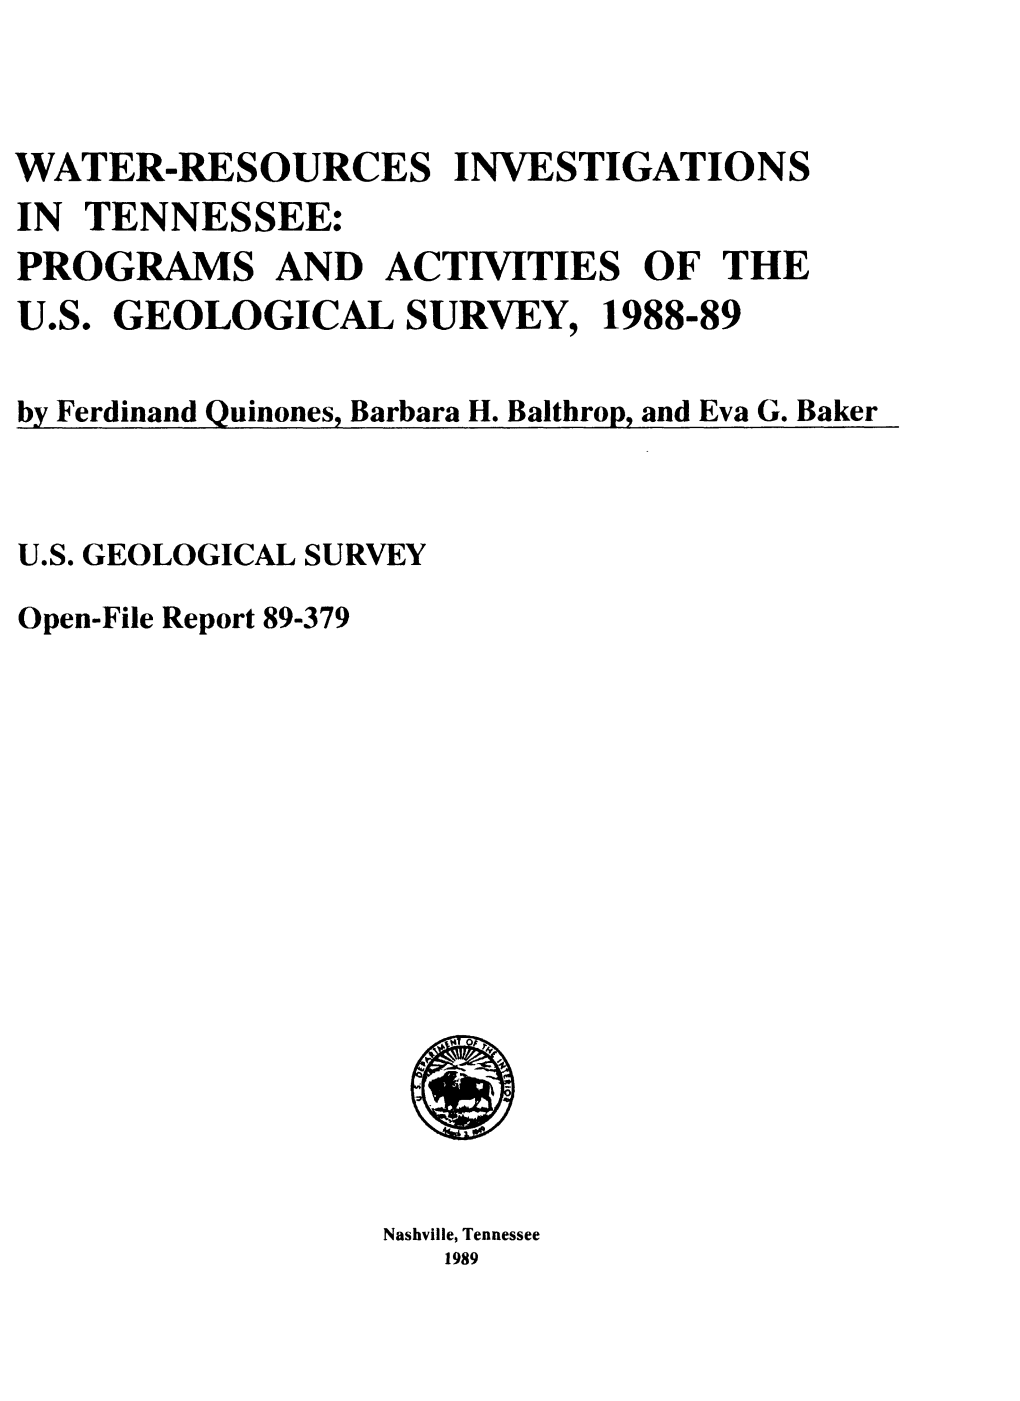 Water-Resources Investigations in Tennessee: Programs and Activities of the U.S